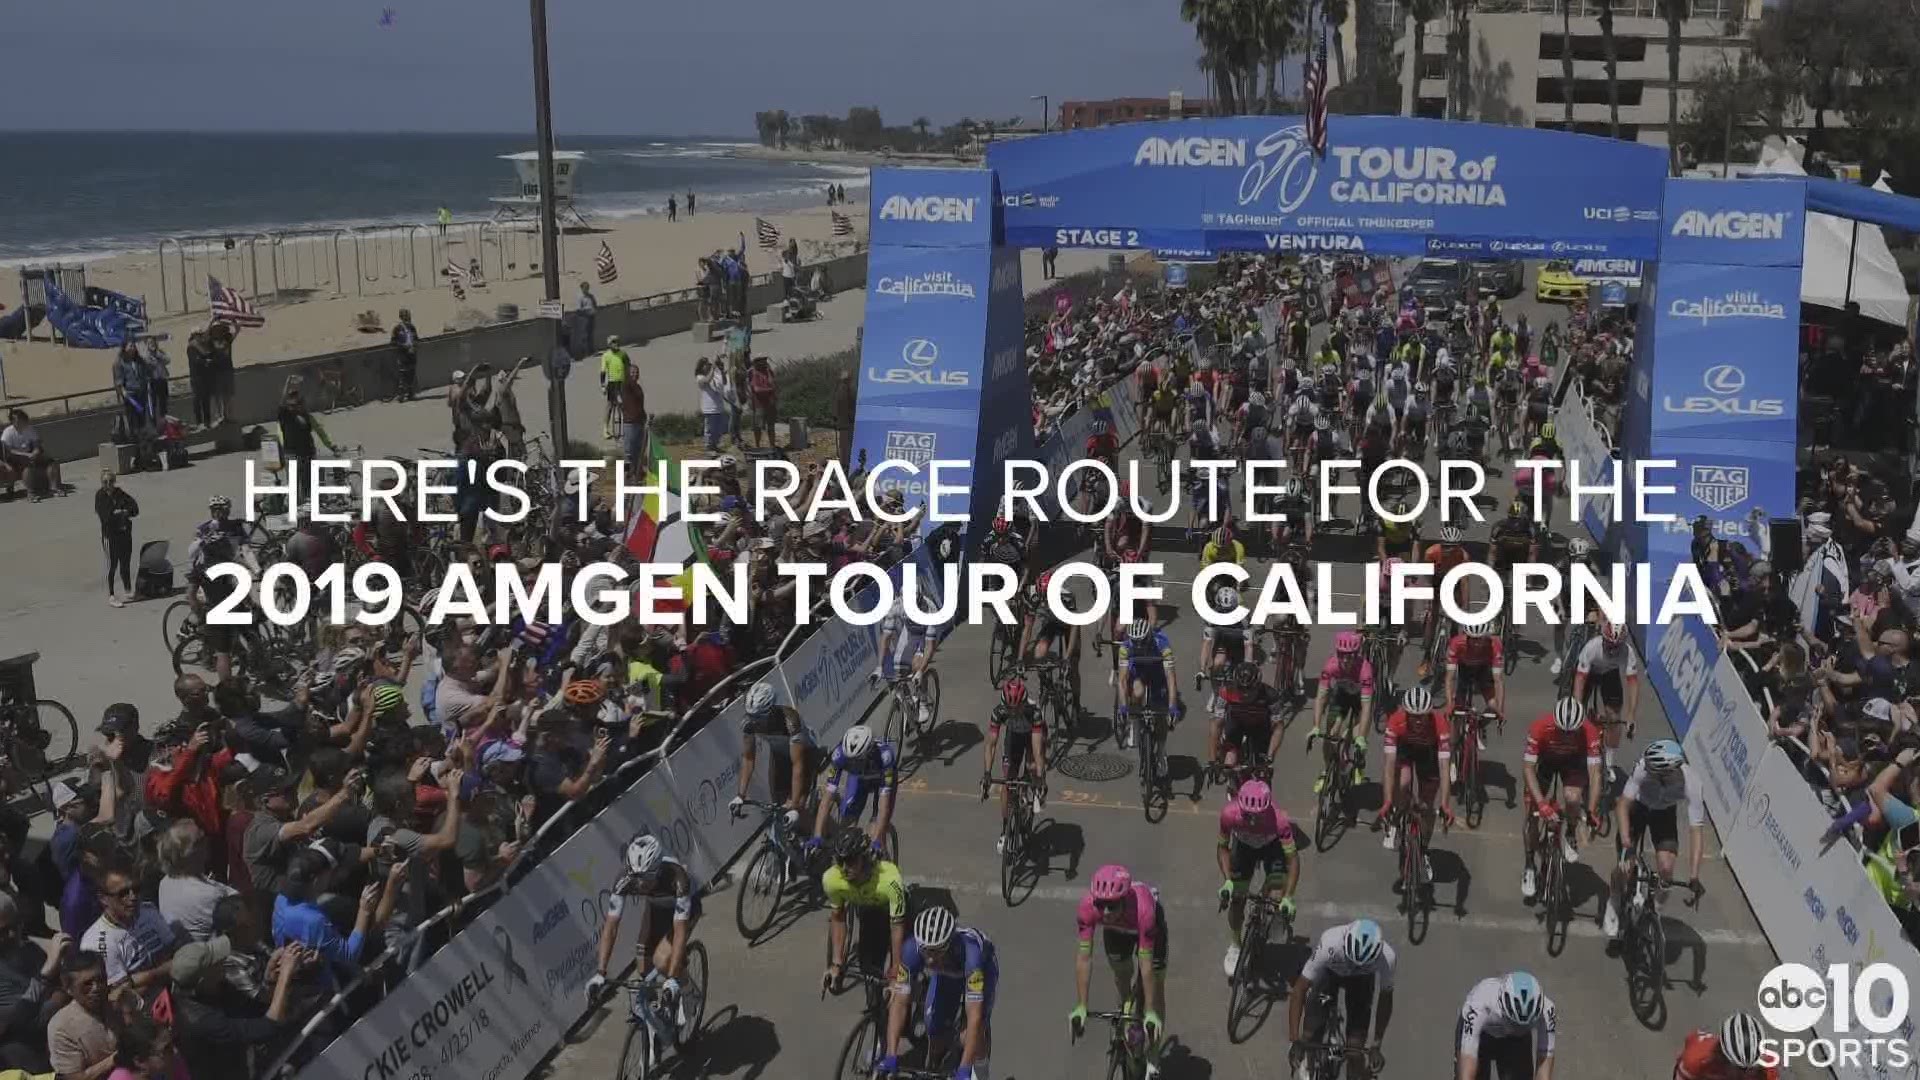 Organizers call the Amgen Tour of California "the international postcard for the state."